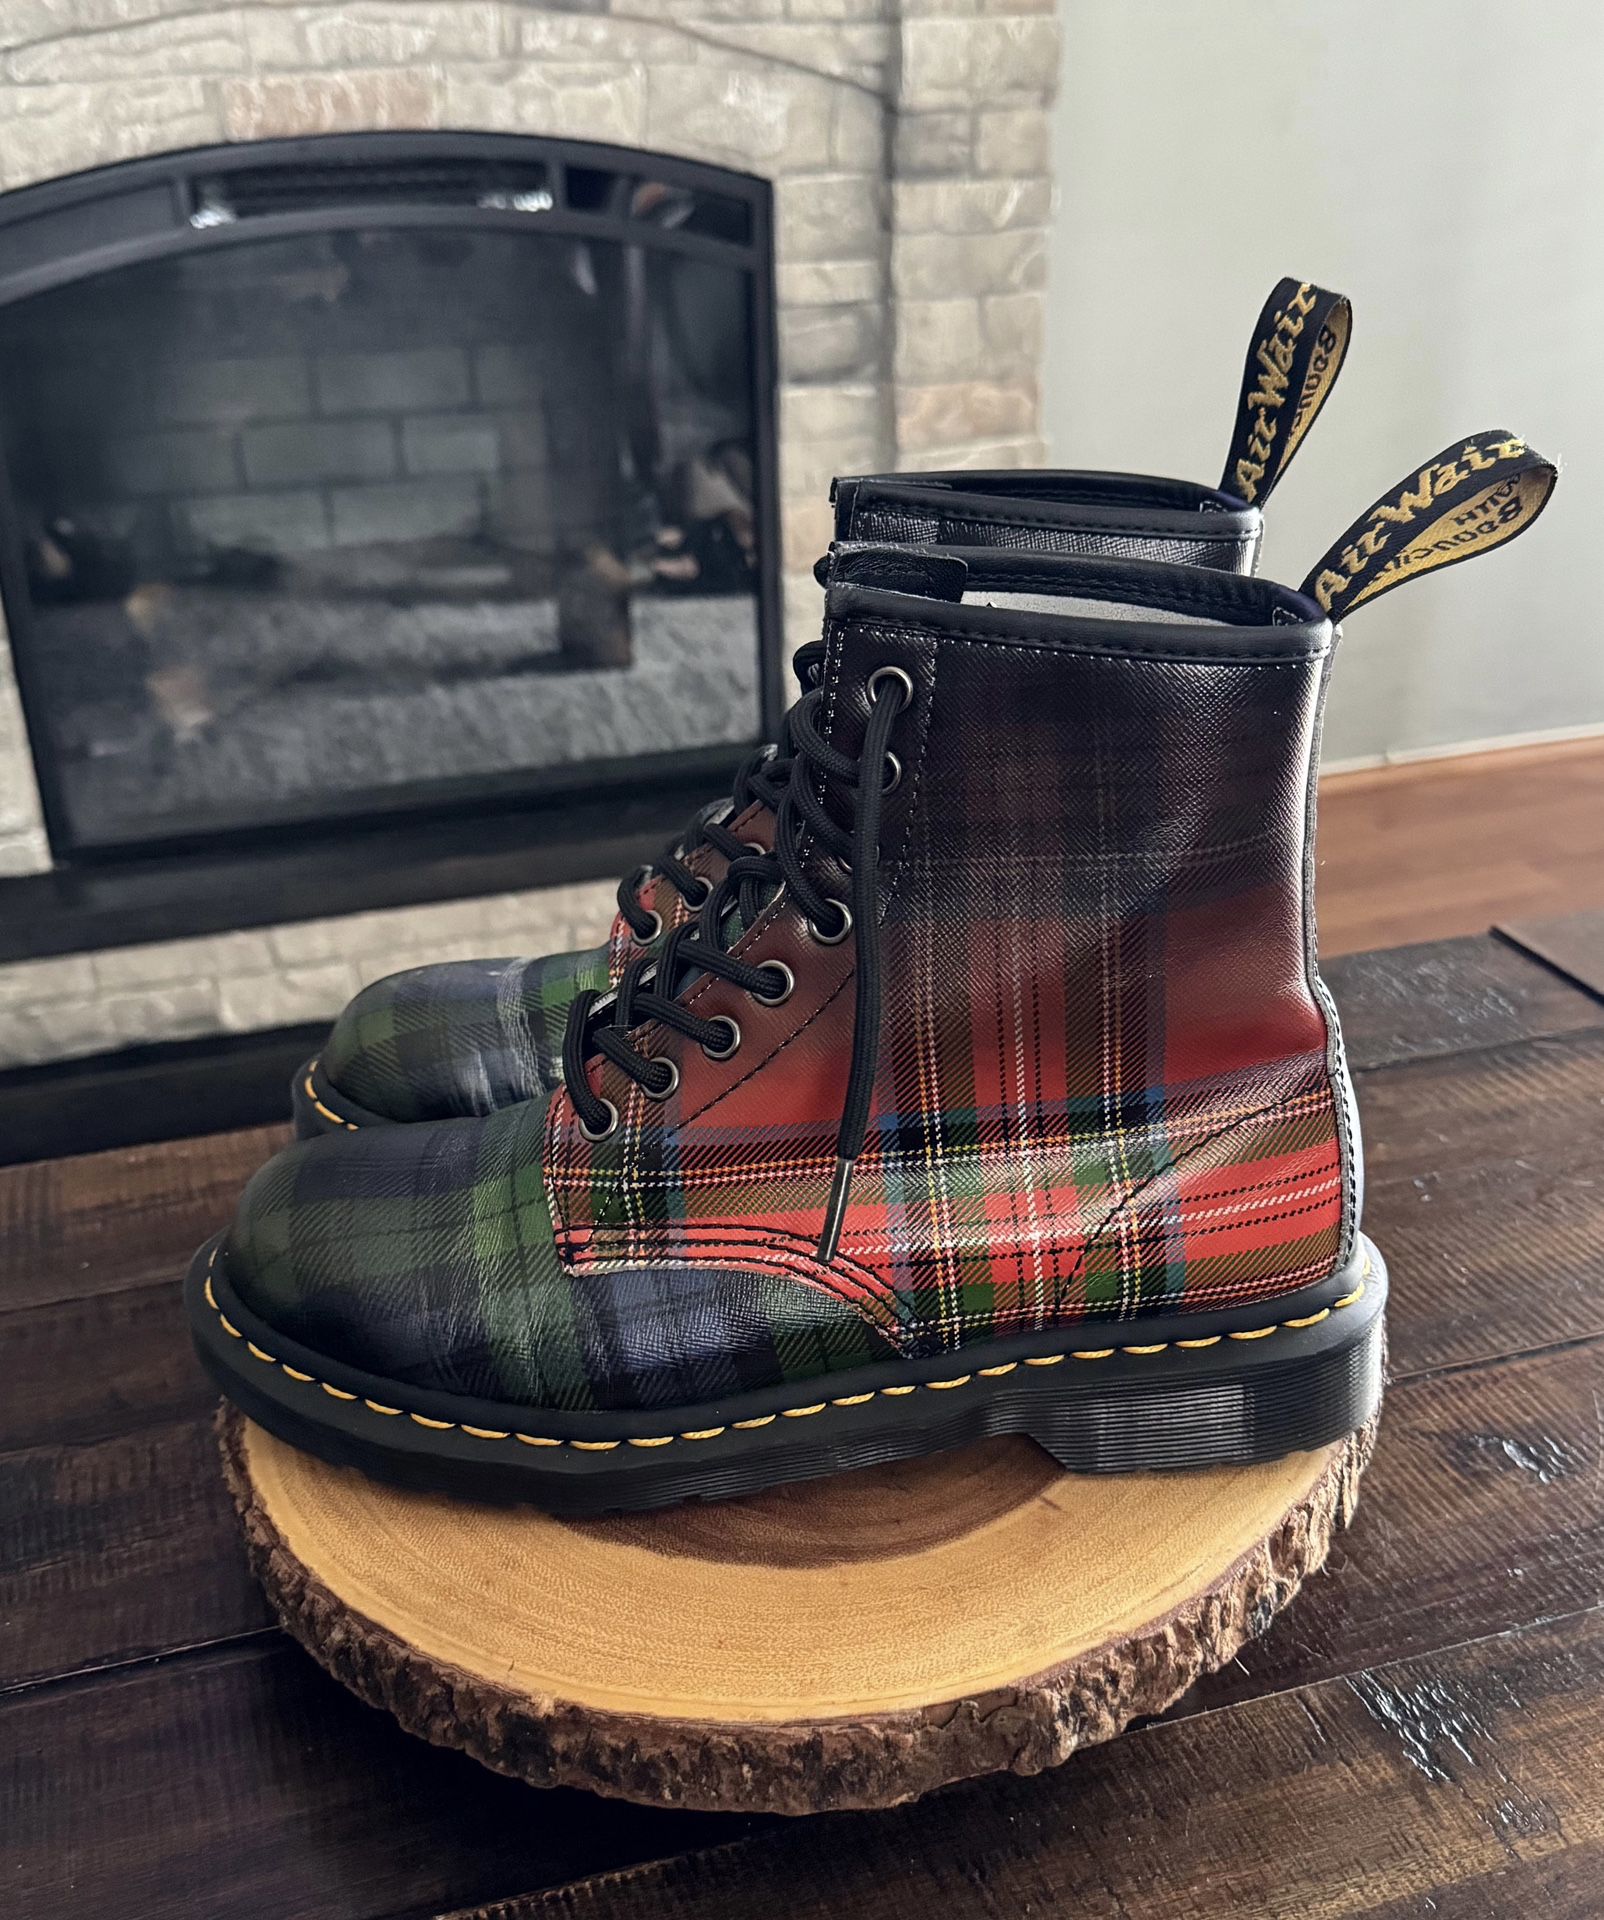 Men’s Dr. Martens 1460 Tartan plaid boots. Size 7. Retail $180. Rare lace up boots in great shape has minor signs of wear as pictured.  